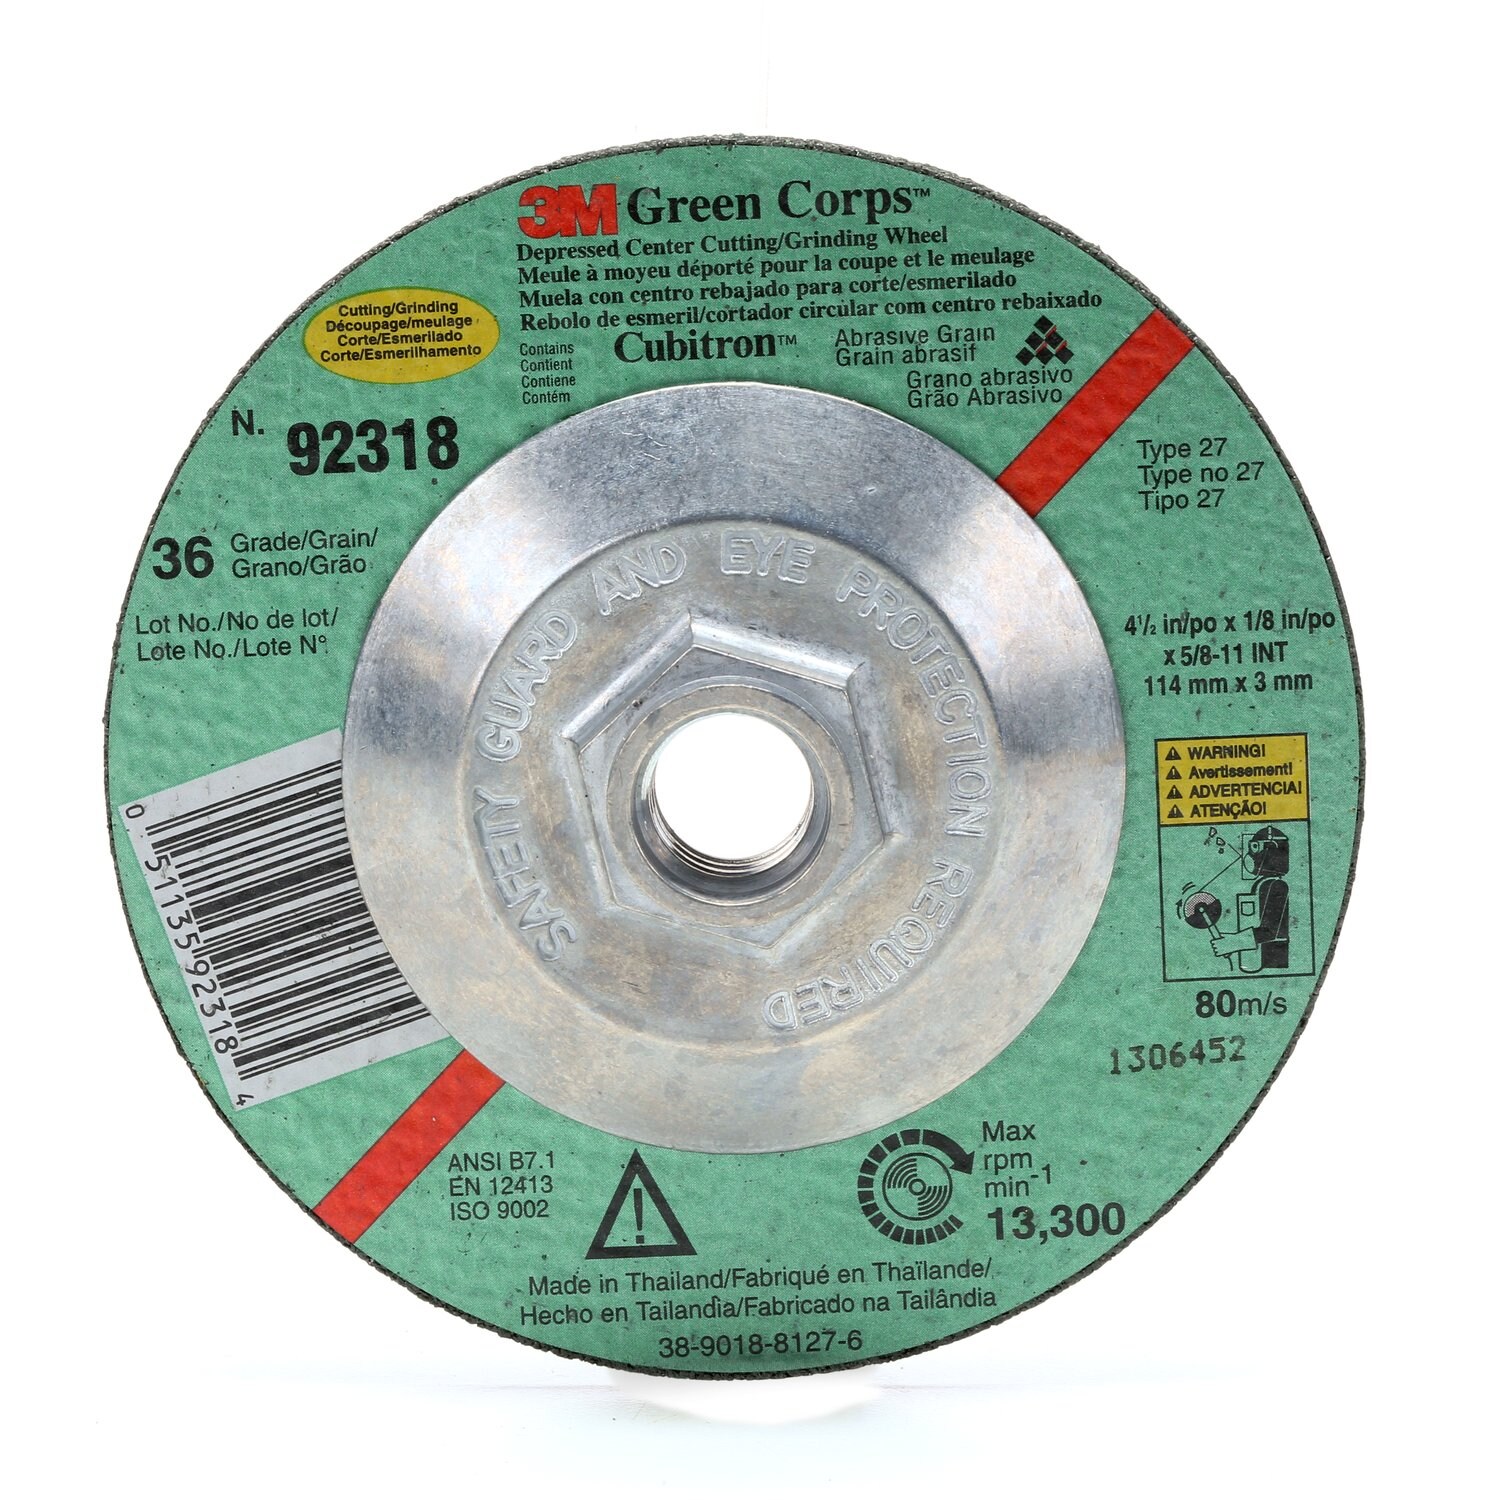 7000118489 - 3M Green Corps Cutting/Grinding Wheel, T27, 7 in x 1/8 in x 7/8, 36,
20 ea/Case